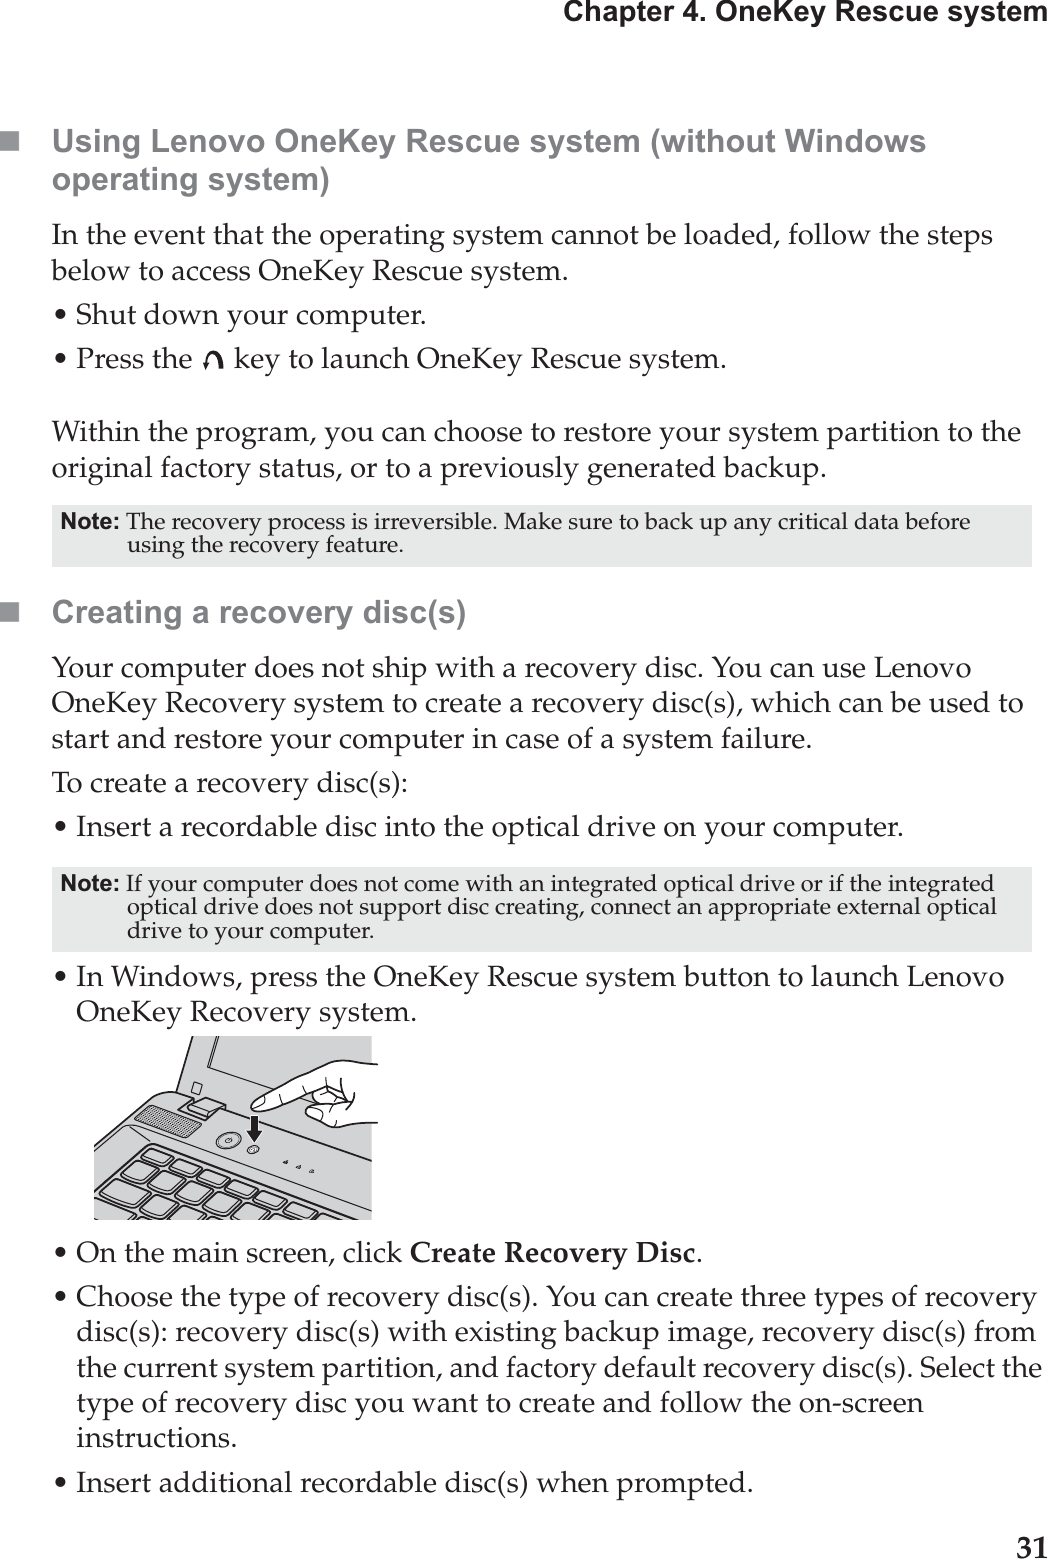 Chapter 4. OneKey Rescue system31Using Lenovo OneKey Rescue system (without Windows operating system)In the event that the operating system cannot be loaded, follow the steps below to access OneKey Rescue system.•Shut down your computer.• Press the   key to launch OneKey Rescue system.Within the program, you can choose to restore your system partition to the original factory status, or to a previously generated backup.Creating a recovery disc(s)Your computer does not ship with a recovery disc. You can use Lenovo OneKey Recovery system to create a recovery disc(s), which can be used to start and restore your computer in case of a system failure. To create a recovery disc(s):• Insert a recordable disc into the optical drive on your computer.• In Windows, press the OneKey Rescue system button to launch Lenovo OneKey Recovery system.• On the main screen, click Create Recovery Disc.• Choose the type of recovery disc(s). You can create three types of recovery disc(s): recovery disc(s) with existing backup image, recovery disc(s) from the current system partition, and factory default recovery disc(s). Select the type of recovery disc you want to create and follow the on-screen instructions. • Insert additional recordable disc(s) when prompted.Note: The recovery process is irreversible. Make sure to back up any critical data before using the recovery feature.Note: If your computer does not come with an integrated optical drive or if the integrated optical drive does not support disc creating, connect an appropriate external optical drive to your computer. 